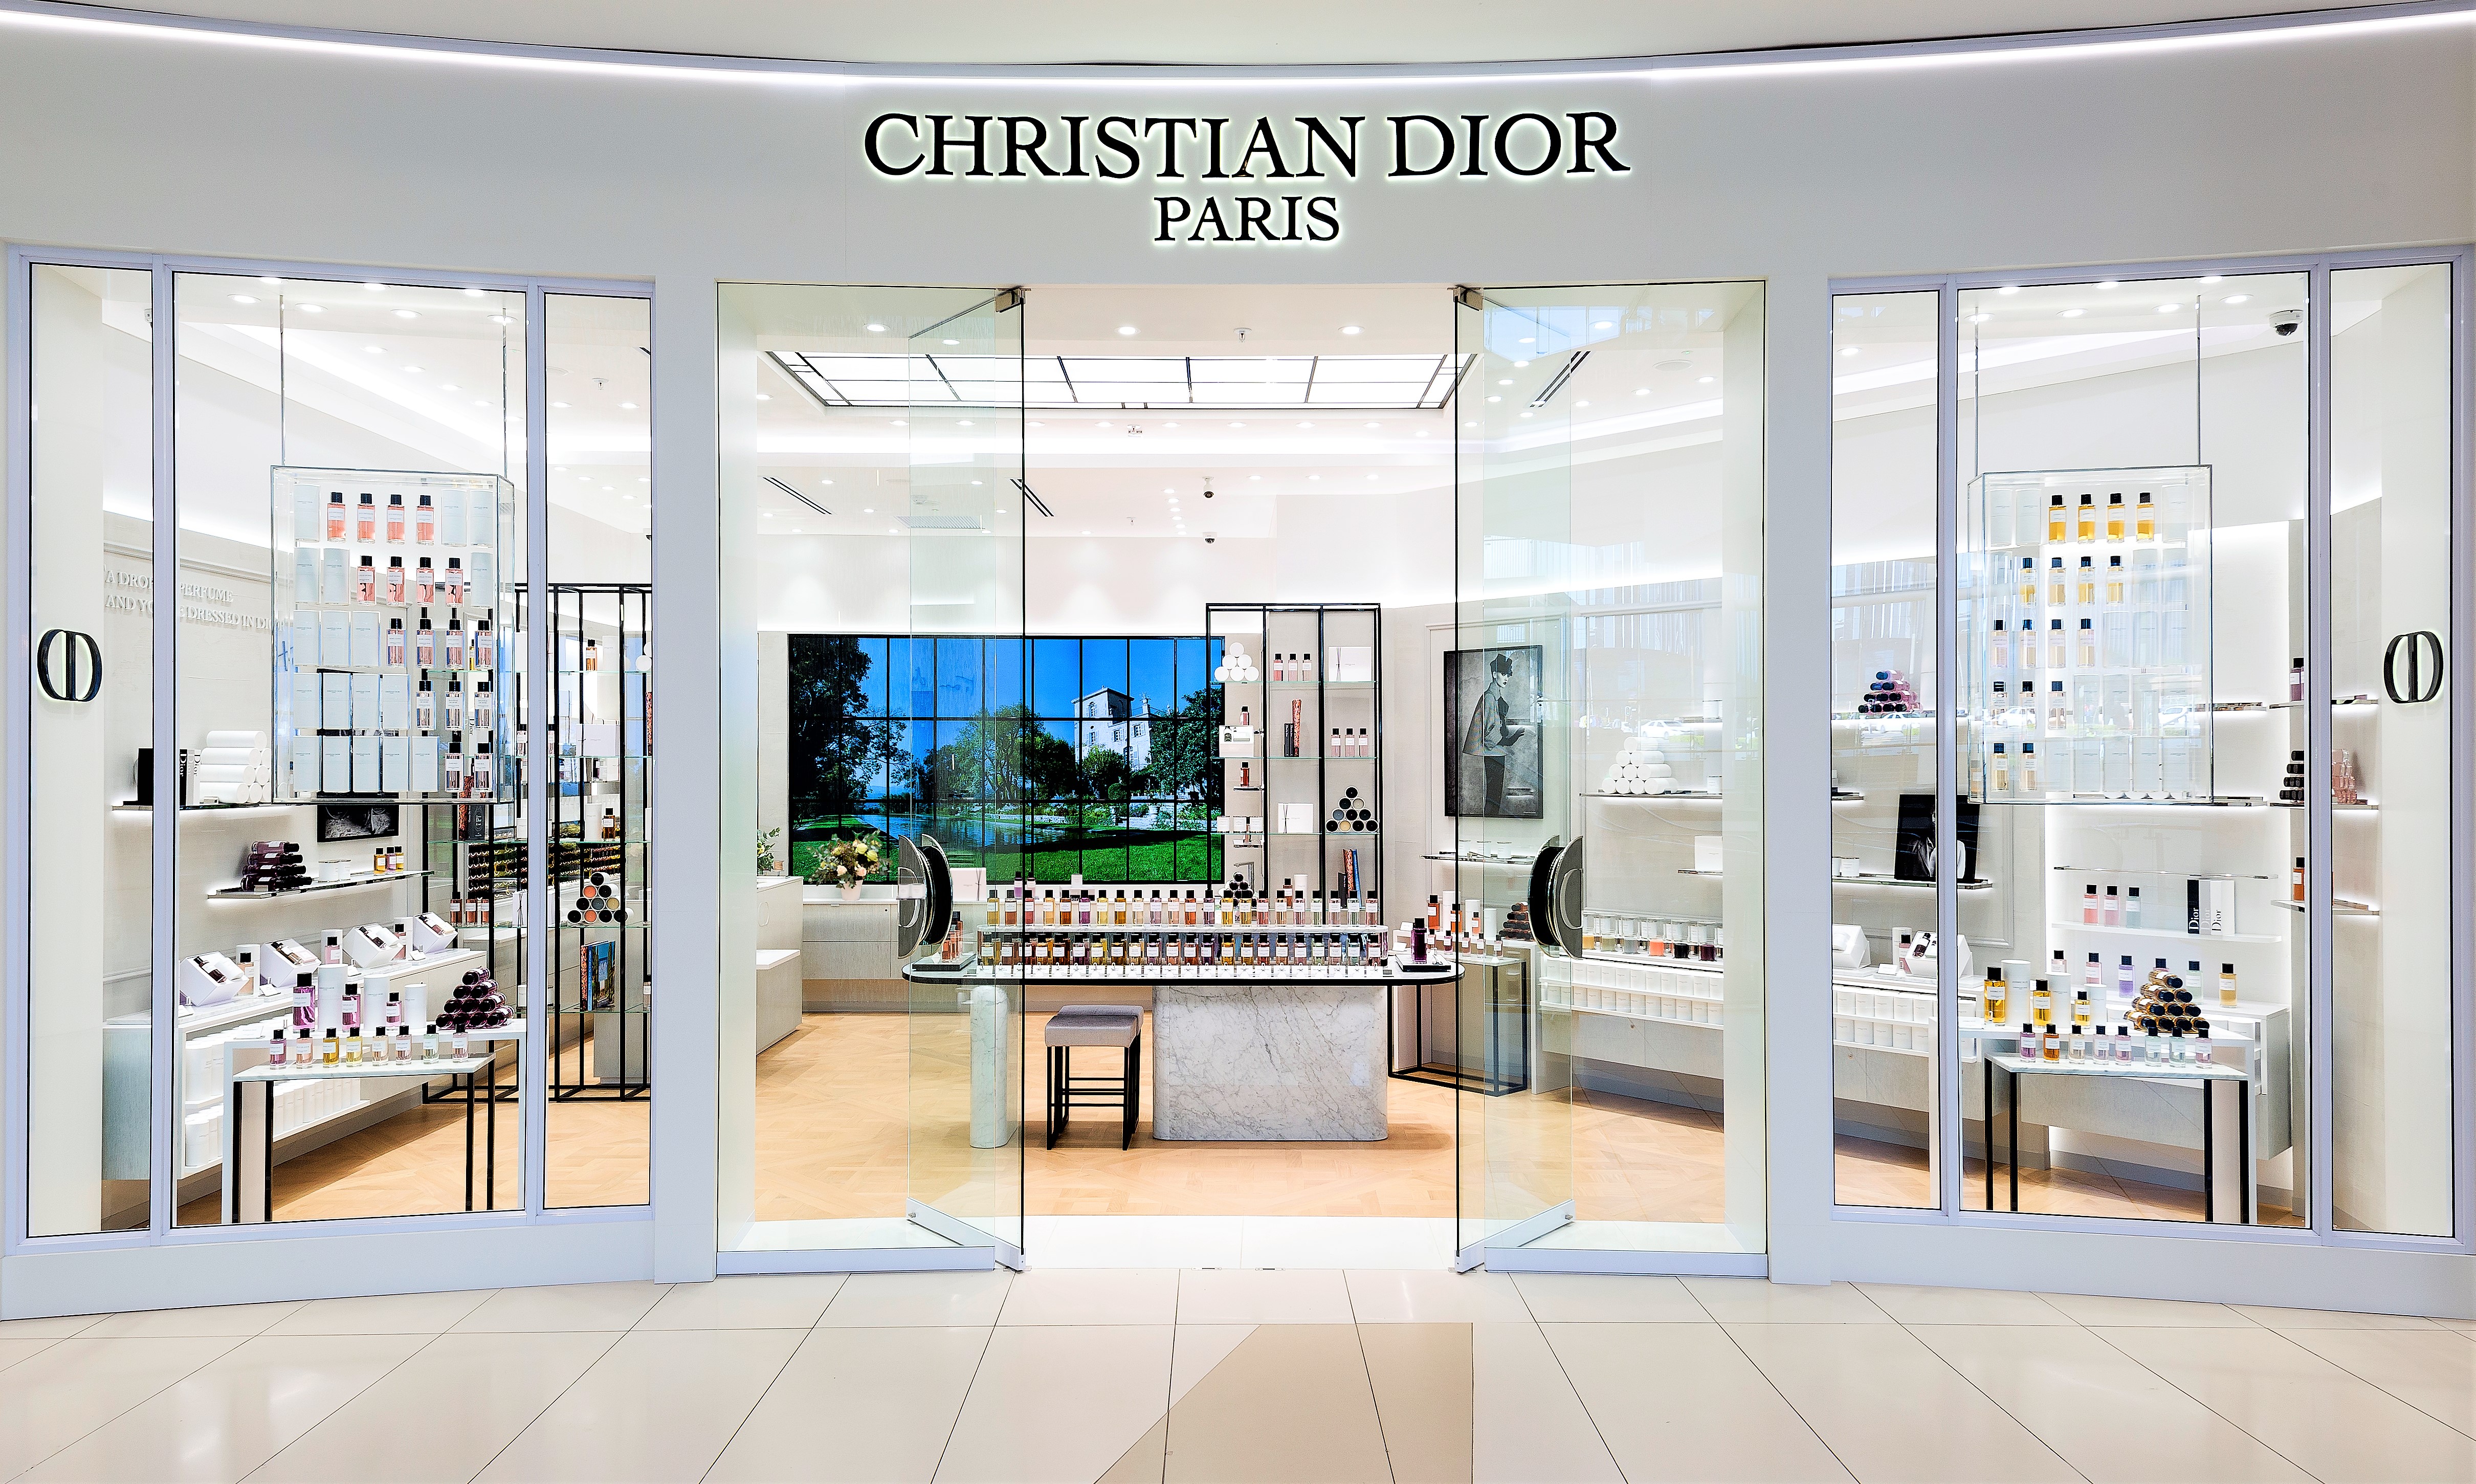 christian dior stores, OFF 75%,Buy!